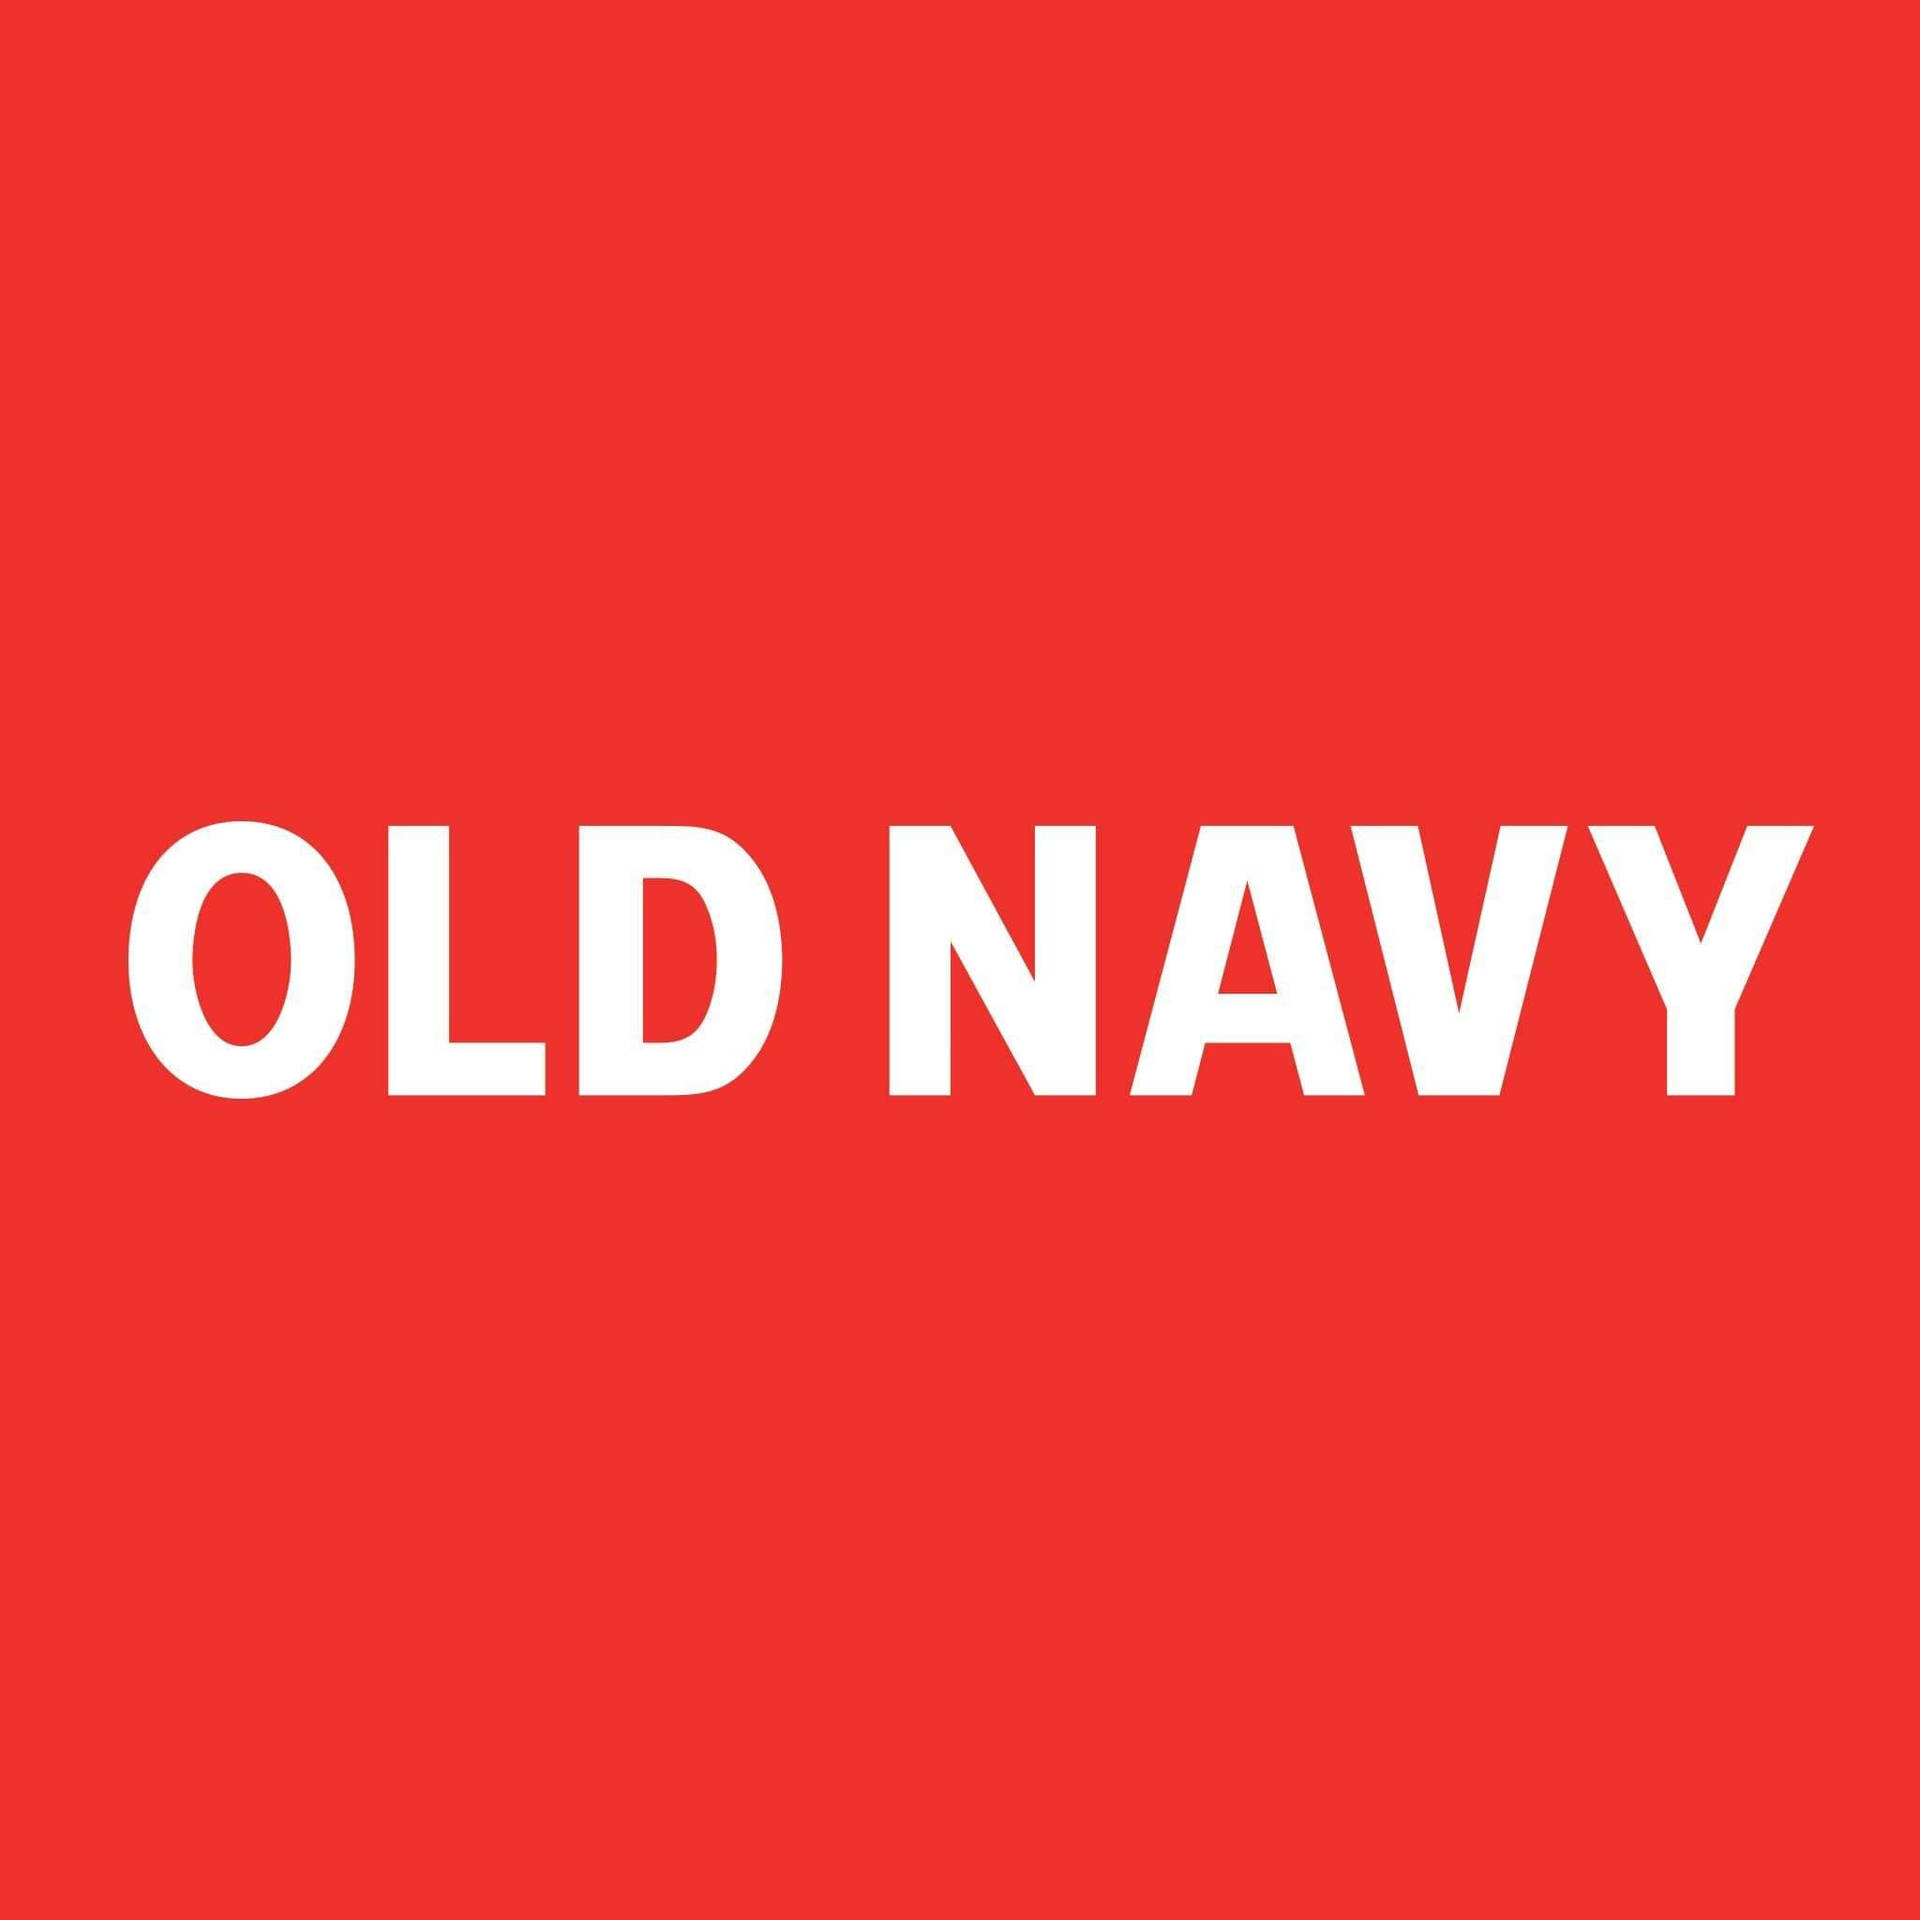 Old Navy Logo Red Background Wallpaper